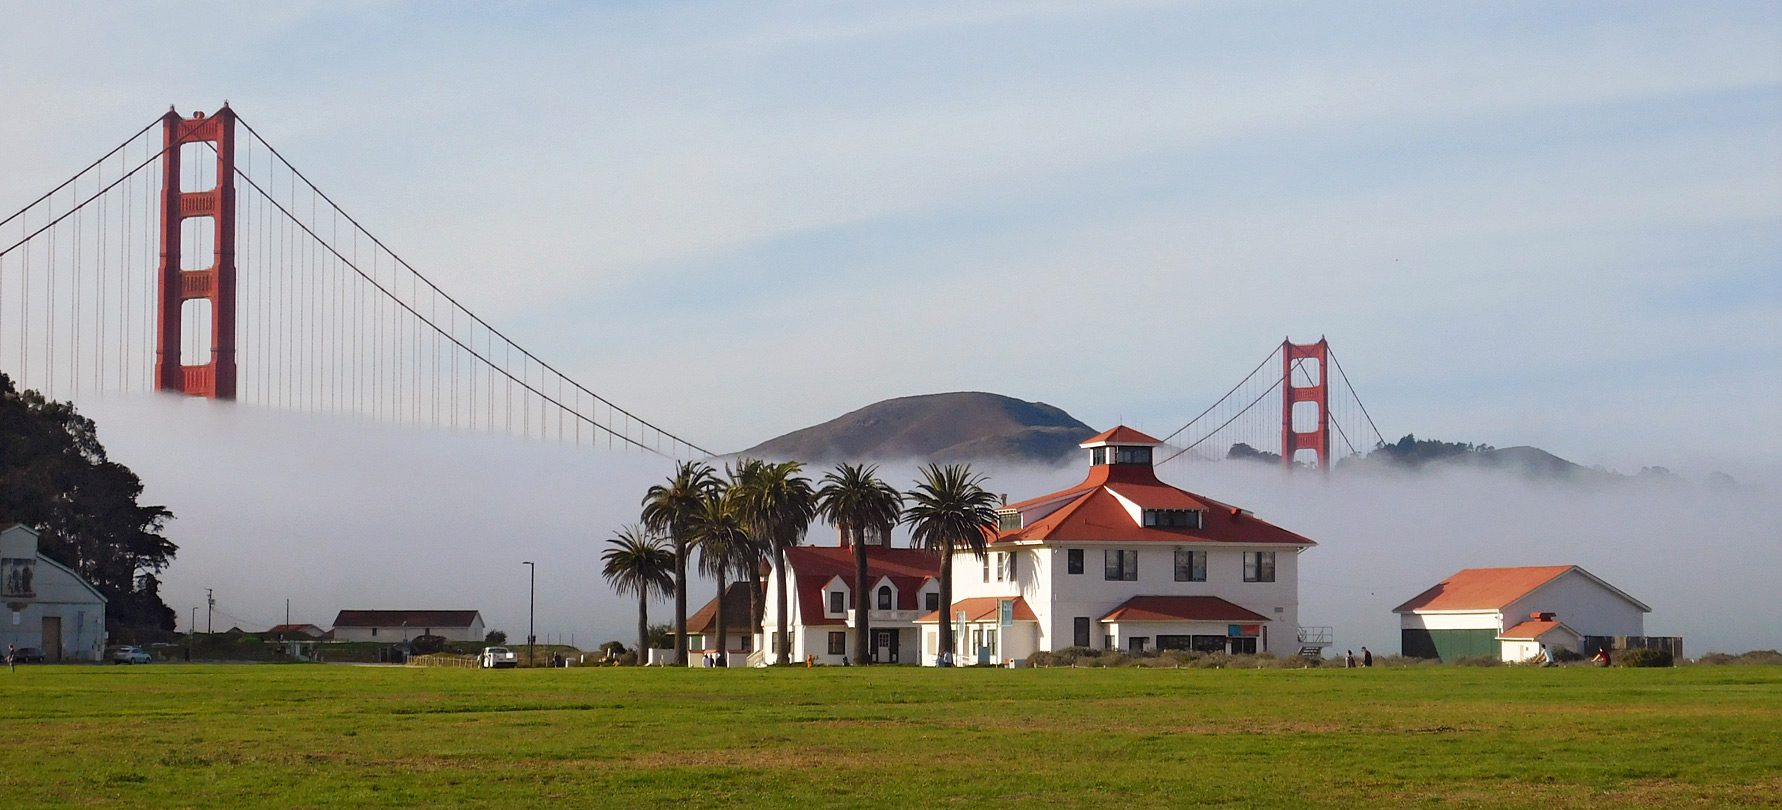 Buildings at Crissy Field